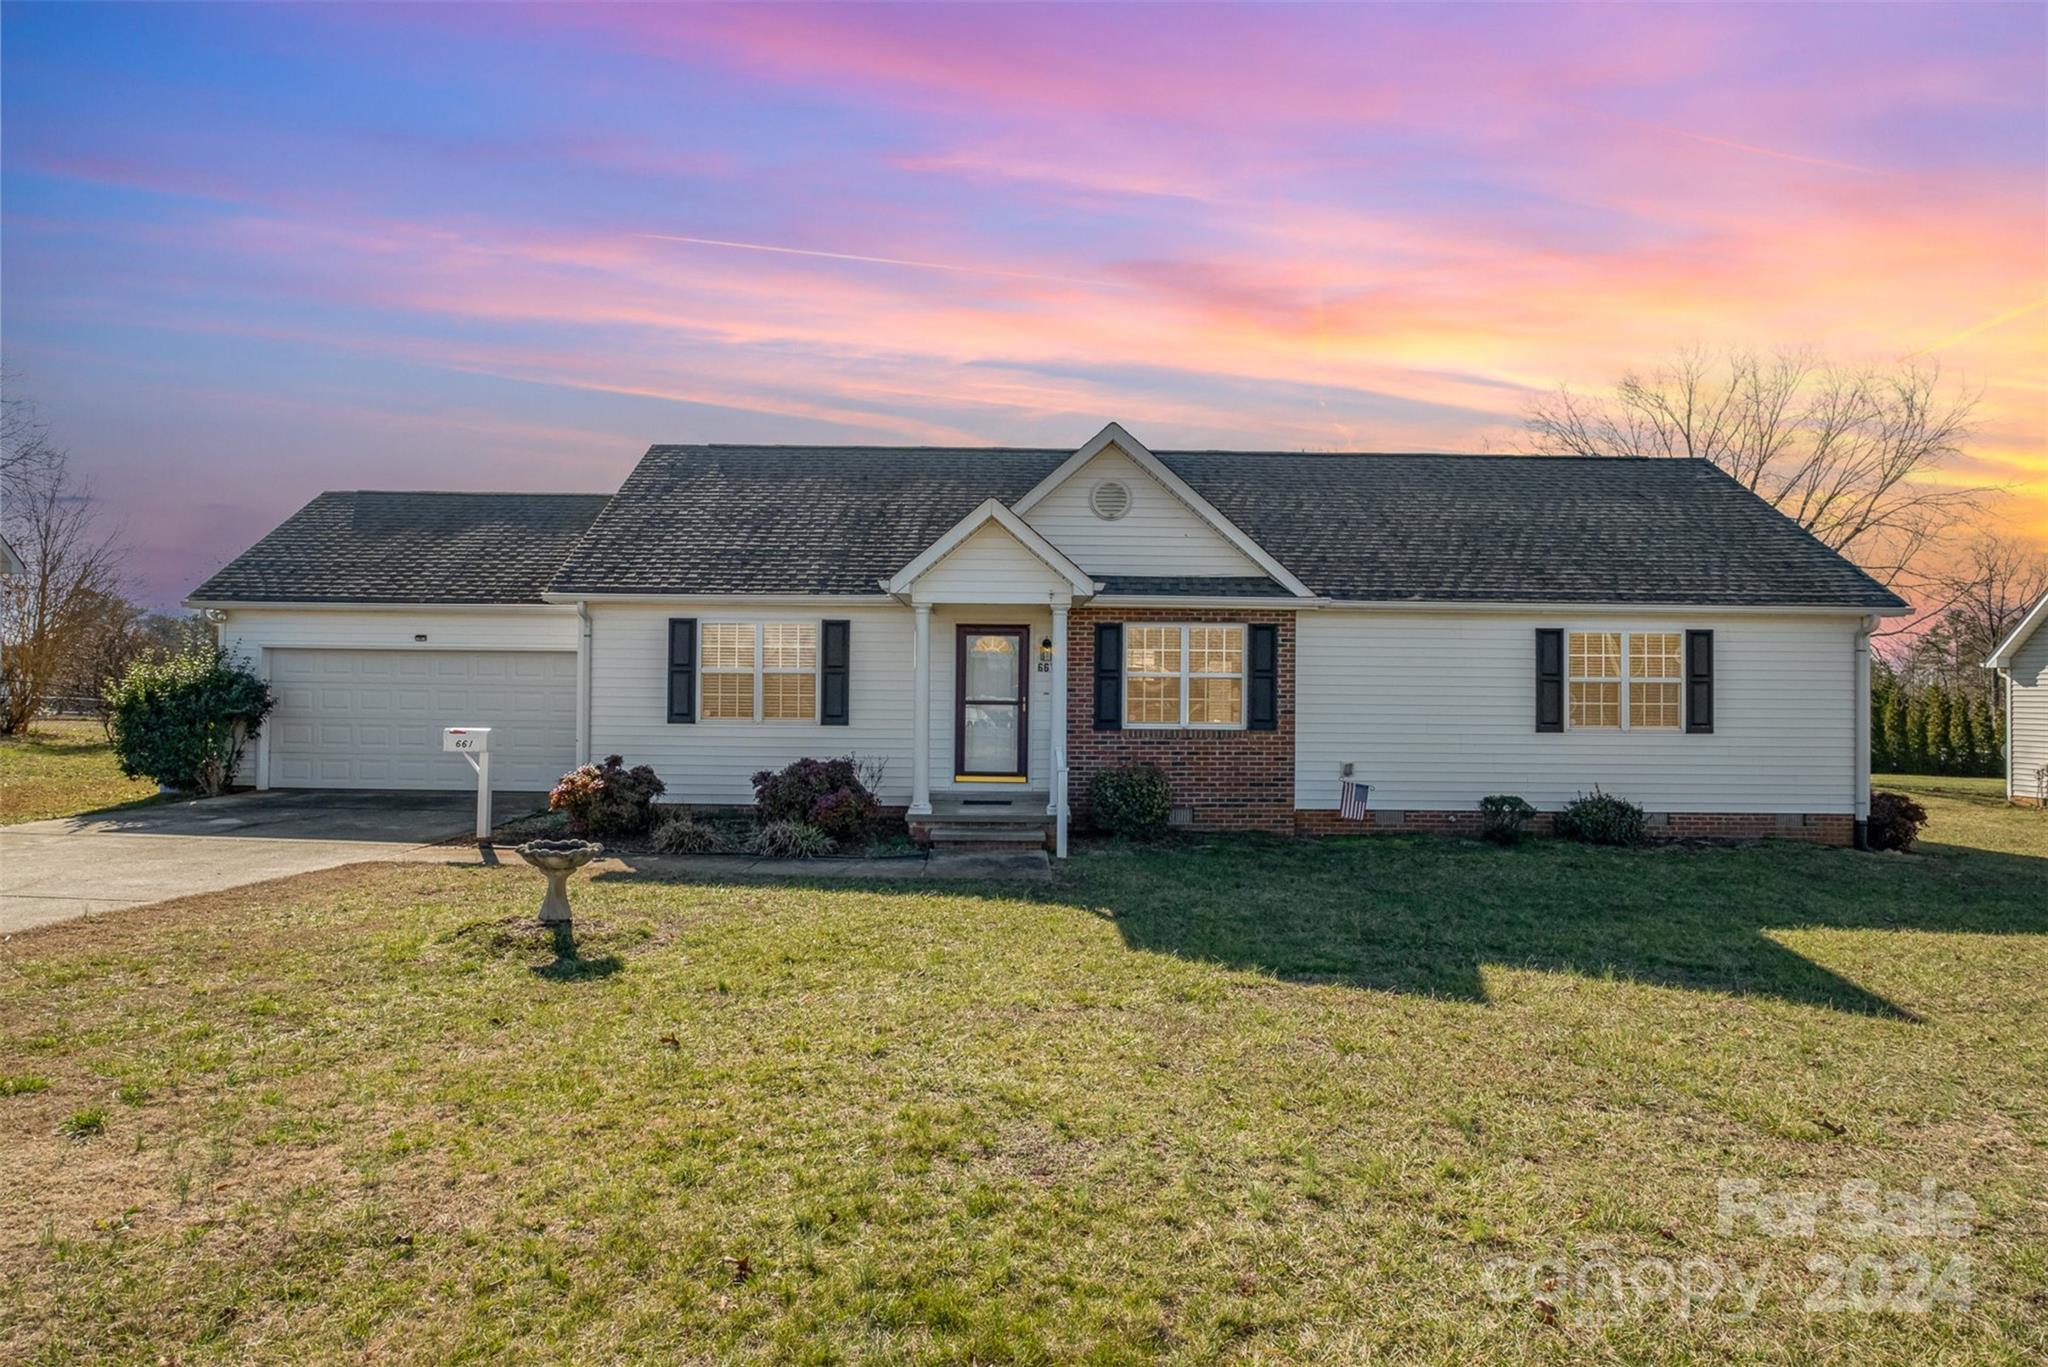 Photo one of 661 Mock Mill Rd Statesville NC 28677 | MLS 4109252